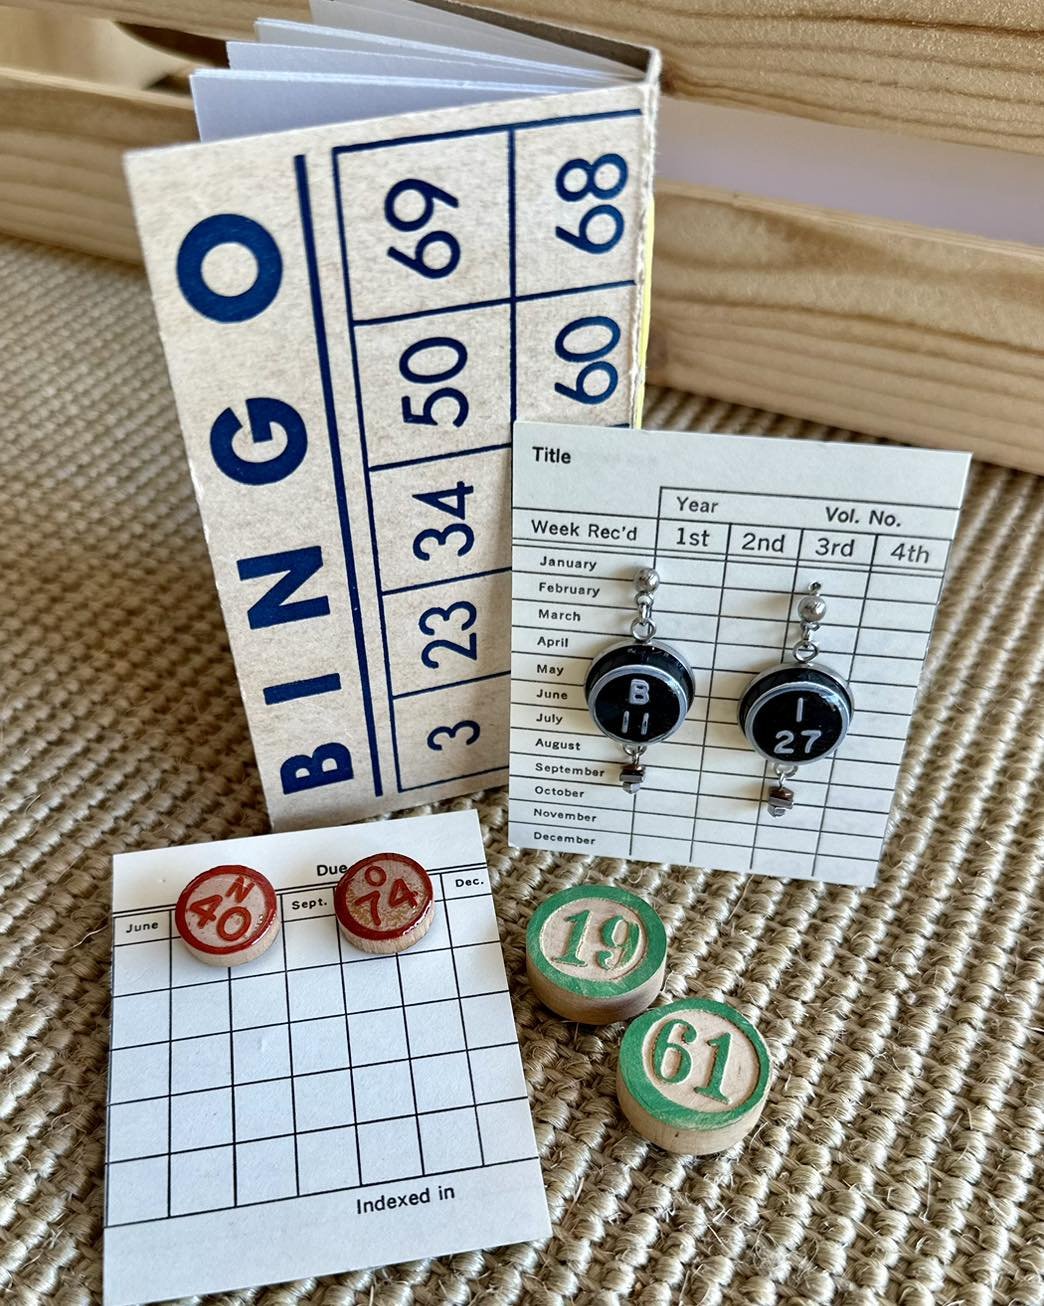 Did somebody say &lsquo;BINGO&rsquo;!? Paper &amp; Brambles has the perfect gift for the Bingo player in your life or the vintage enthusiast. The products feature are made with upcycled, vintage materials.

Stop by Garden City Arts and find lots more